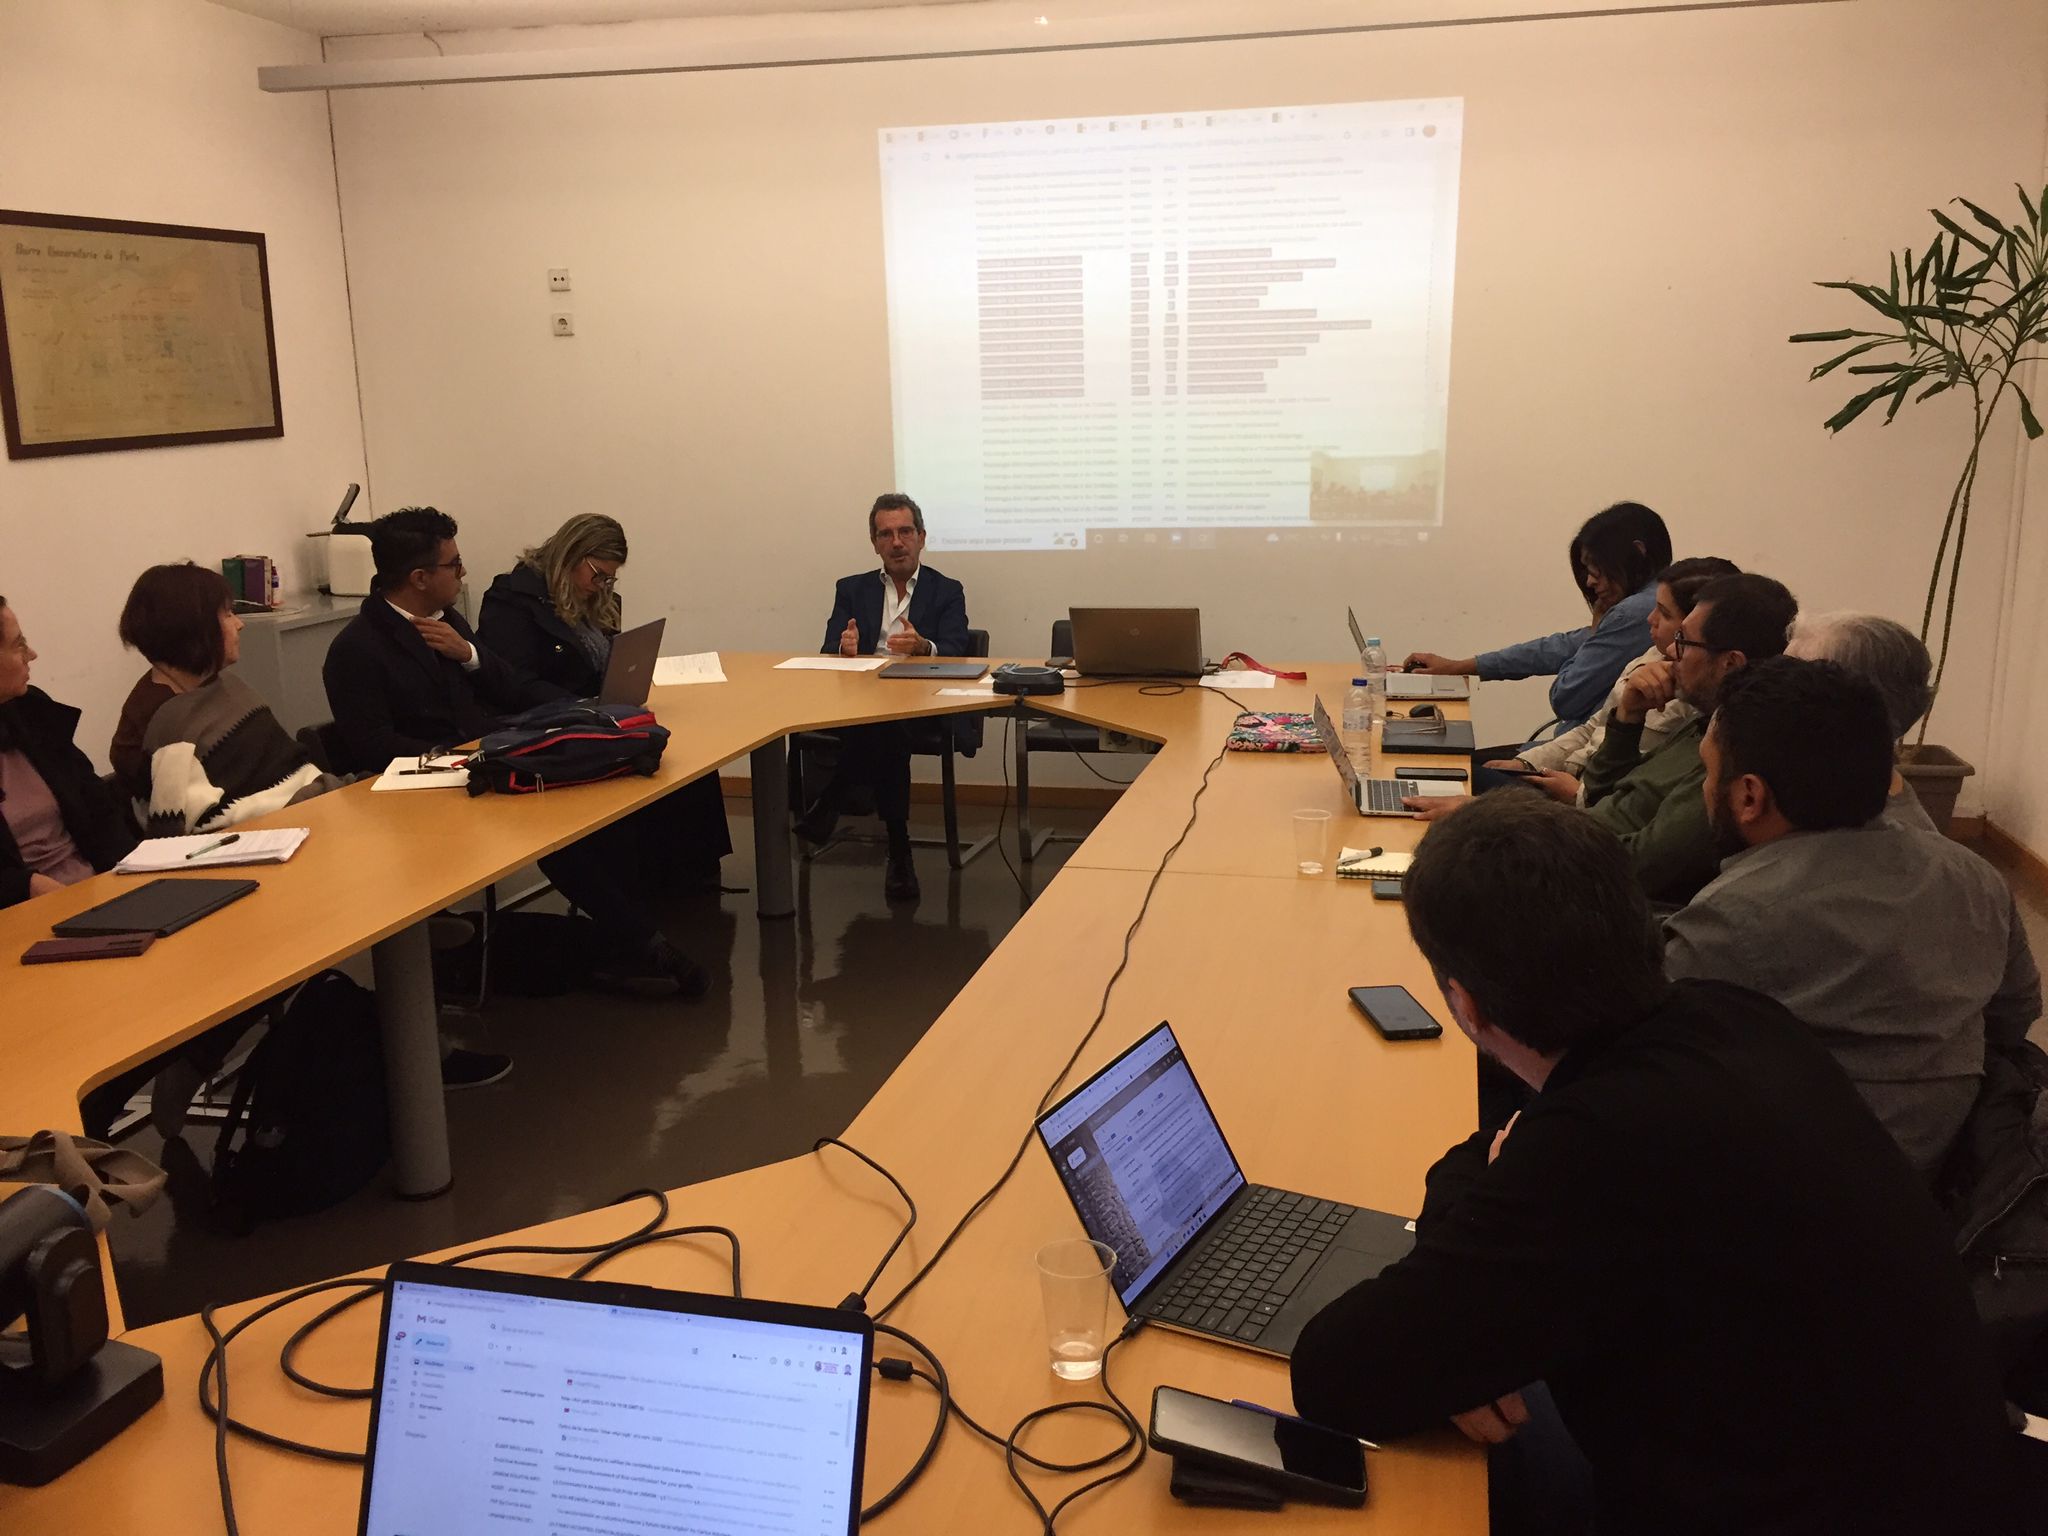 University of Porto hosts the third and final mobility of South American professors in Europe